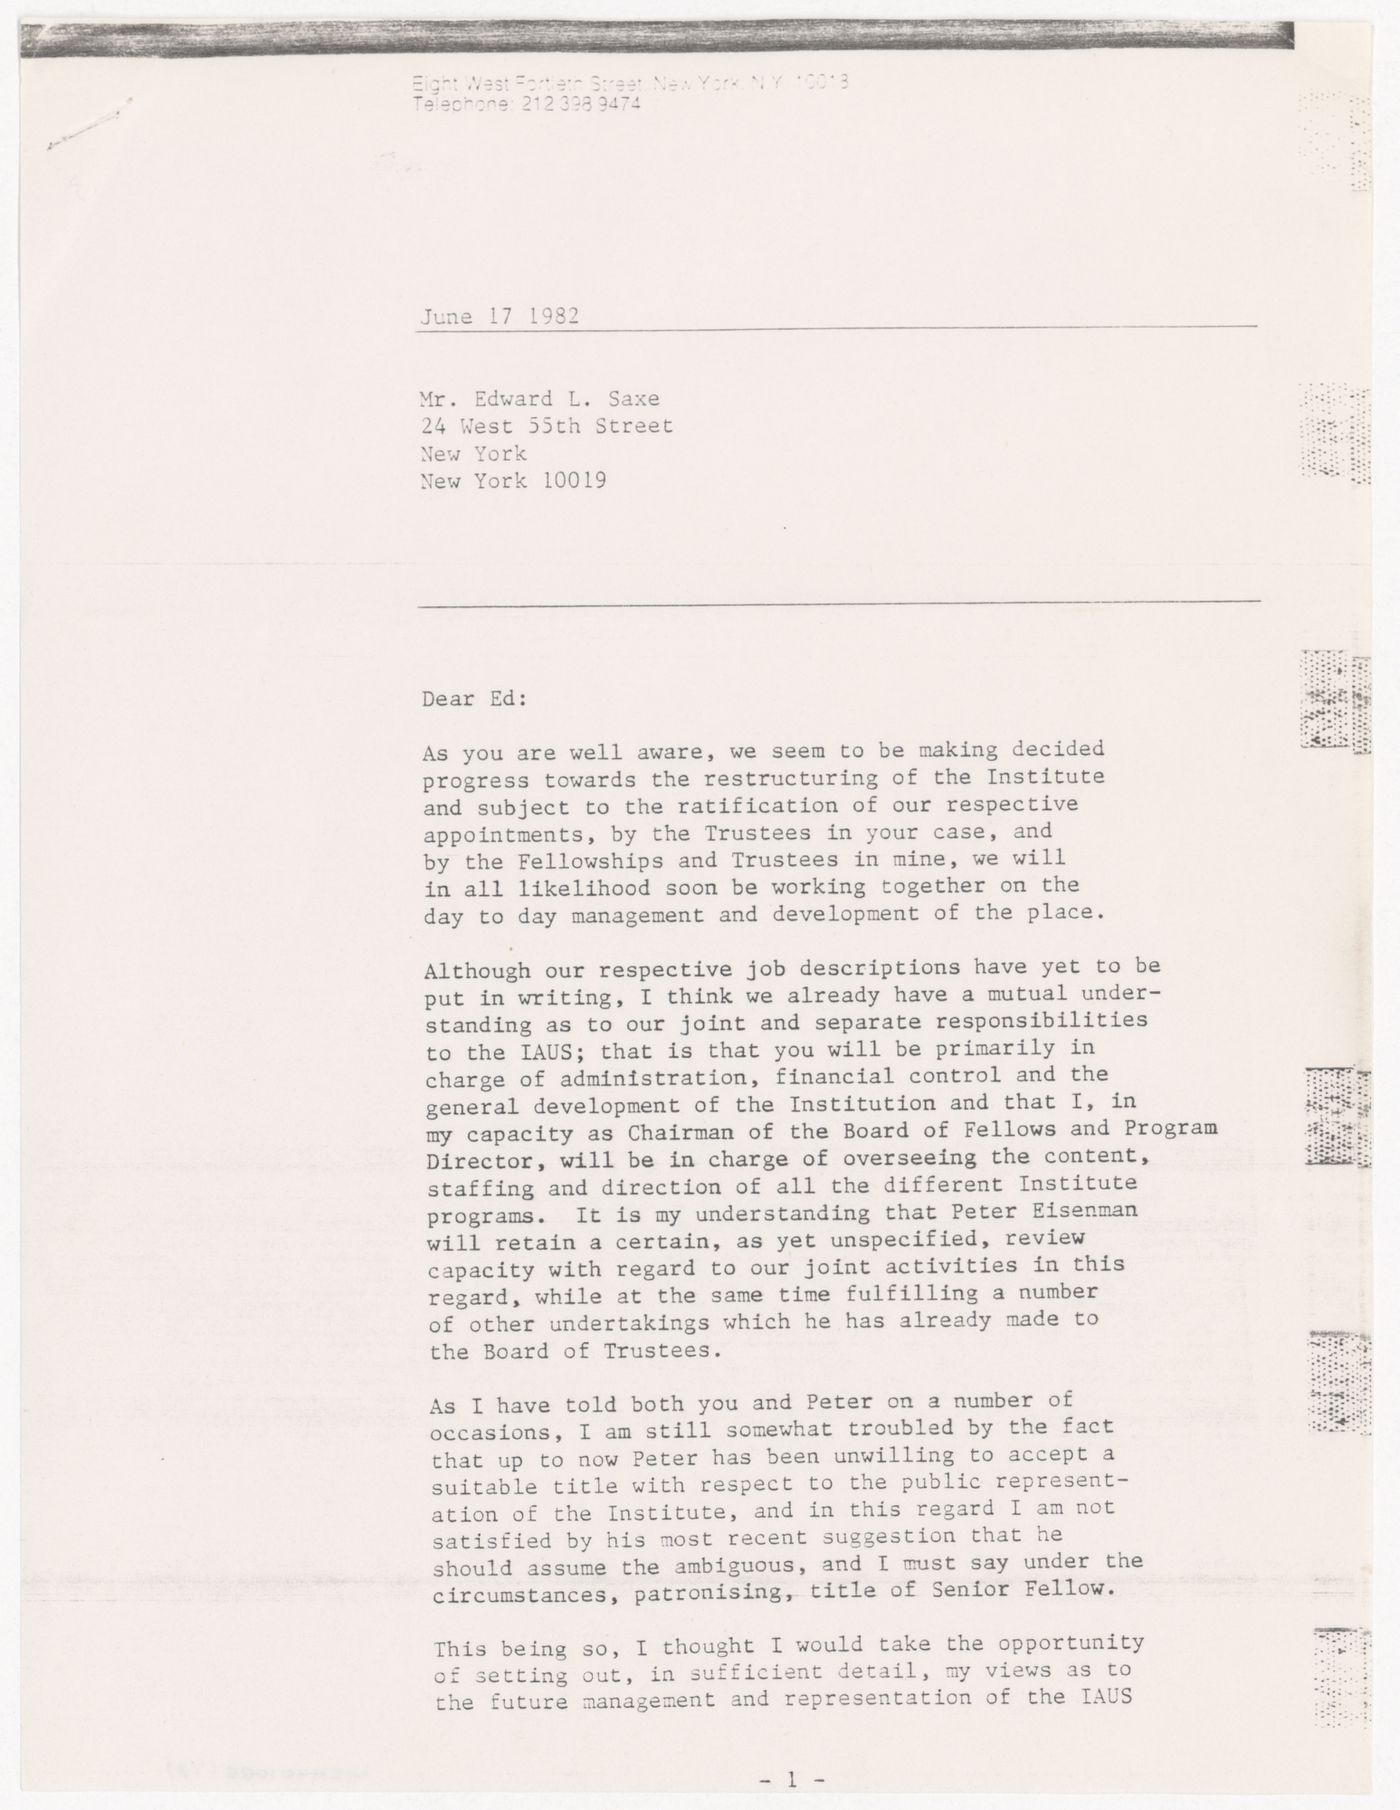 Letter from Kenneth Frampton to Edward L. Saxe about Peter D. Eisenman's role in the IAUS